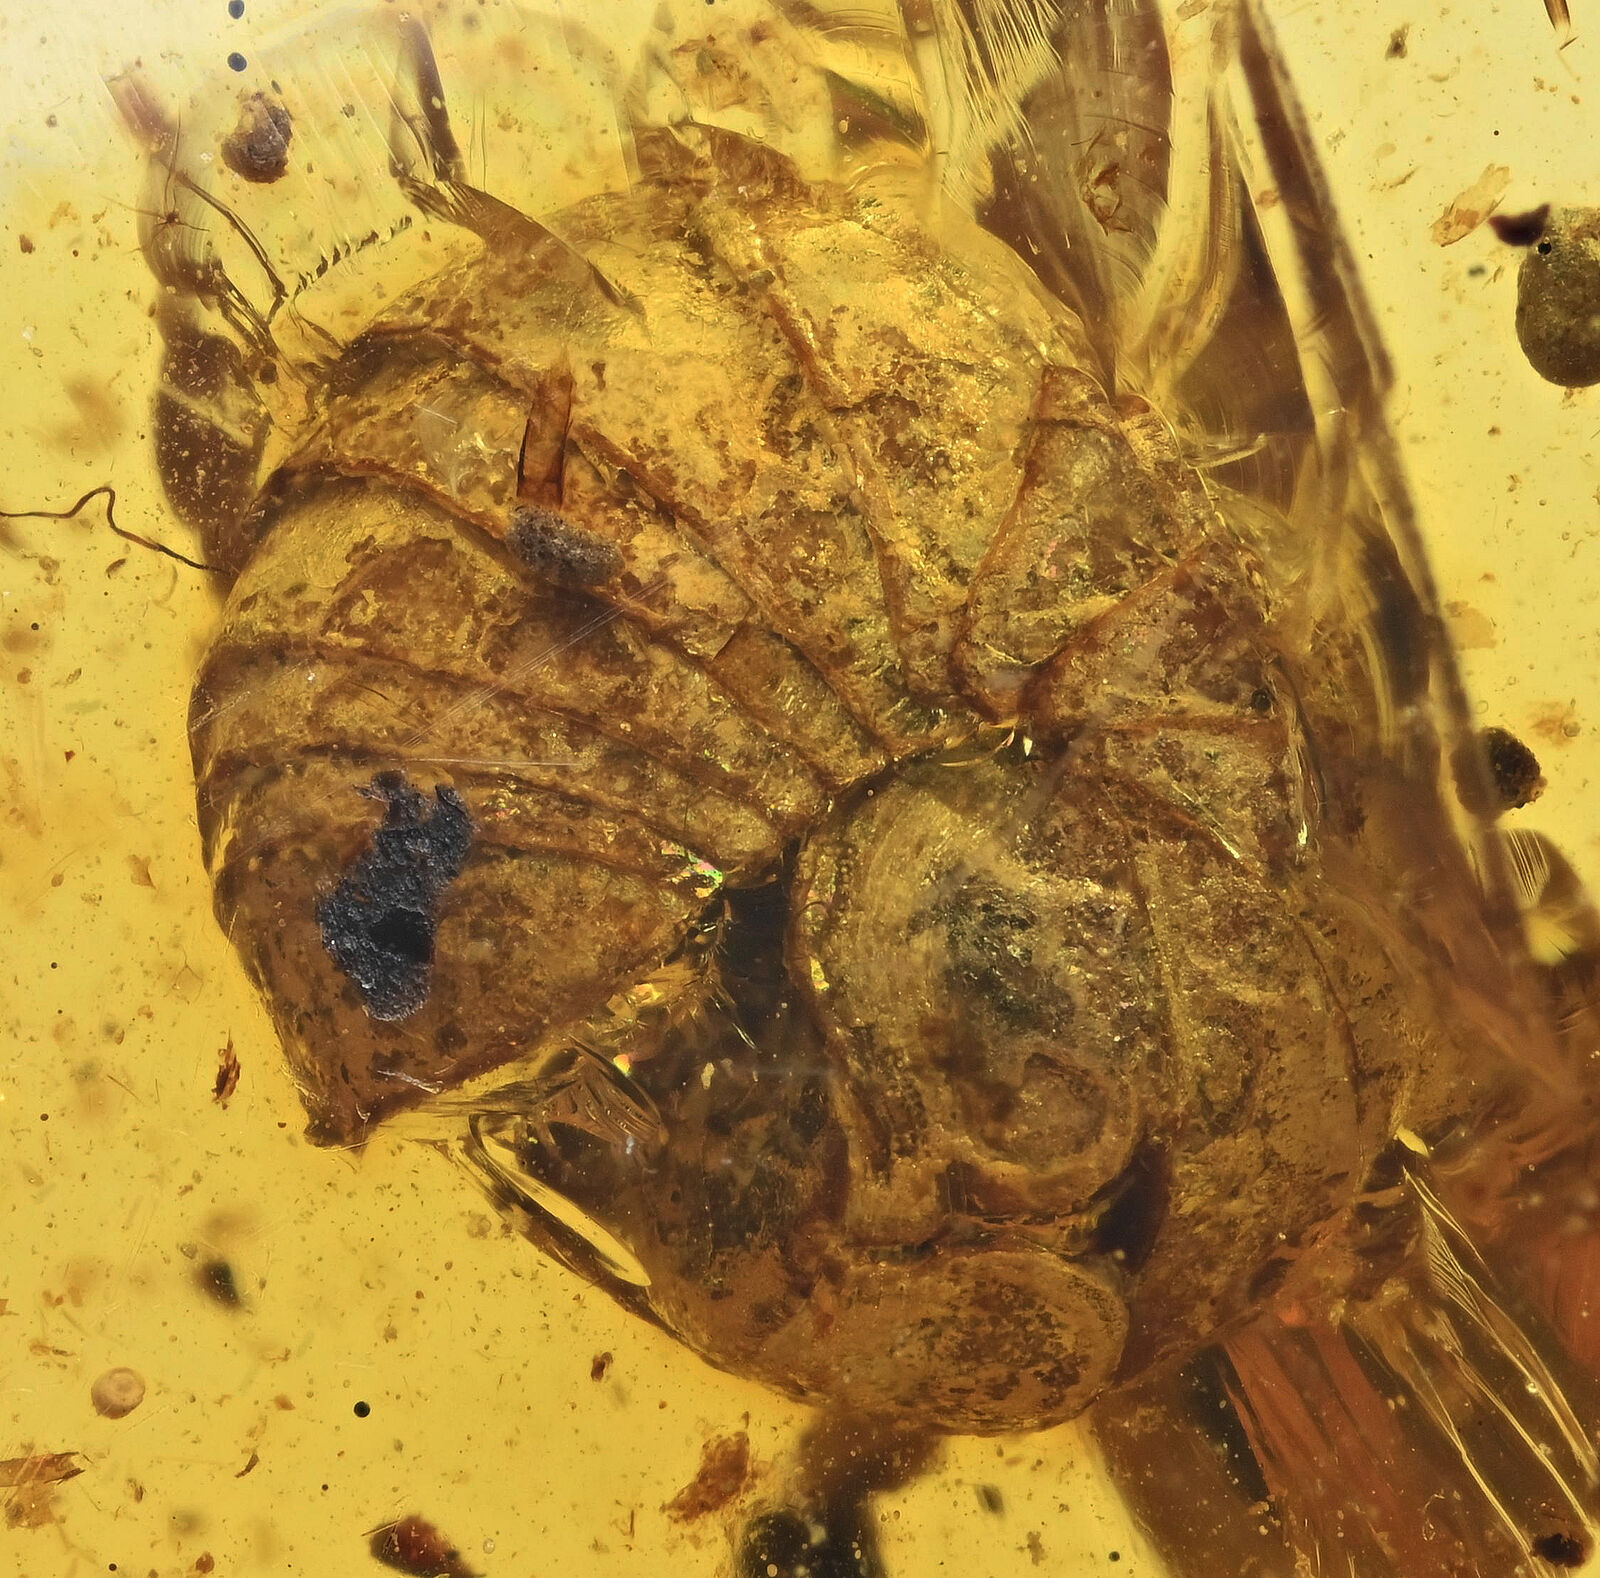 Curled Terrestrial Crustacean (Isopod), Fossil inclusion in Burmese Amber